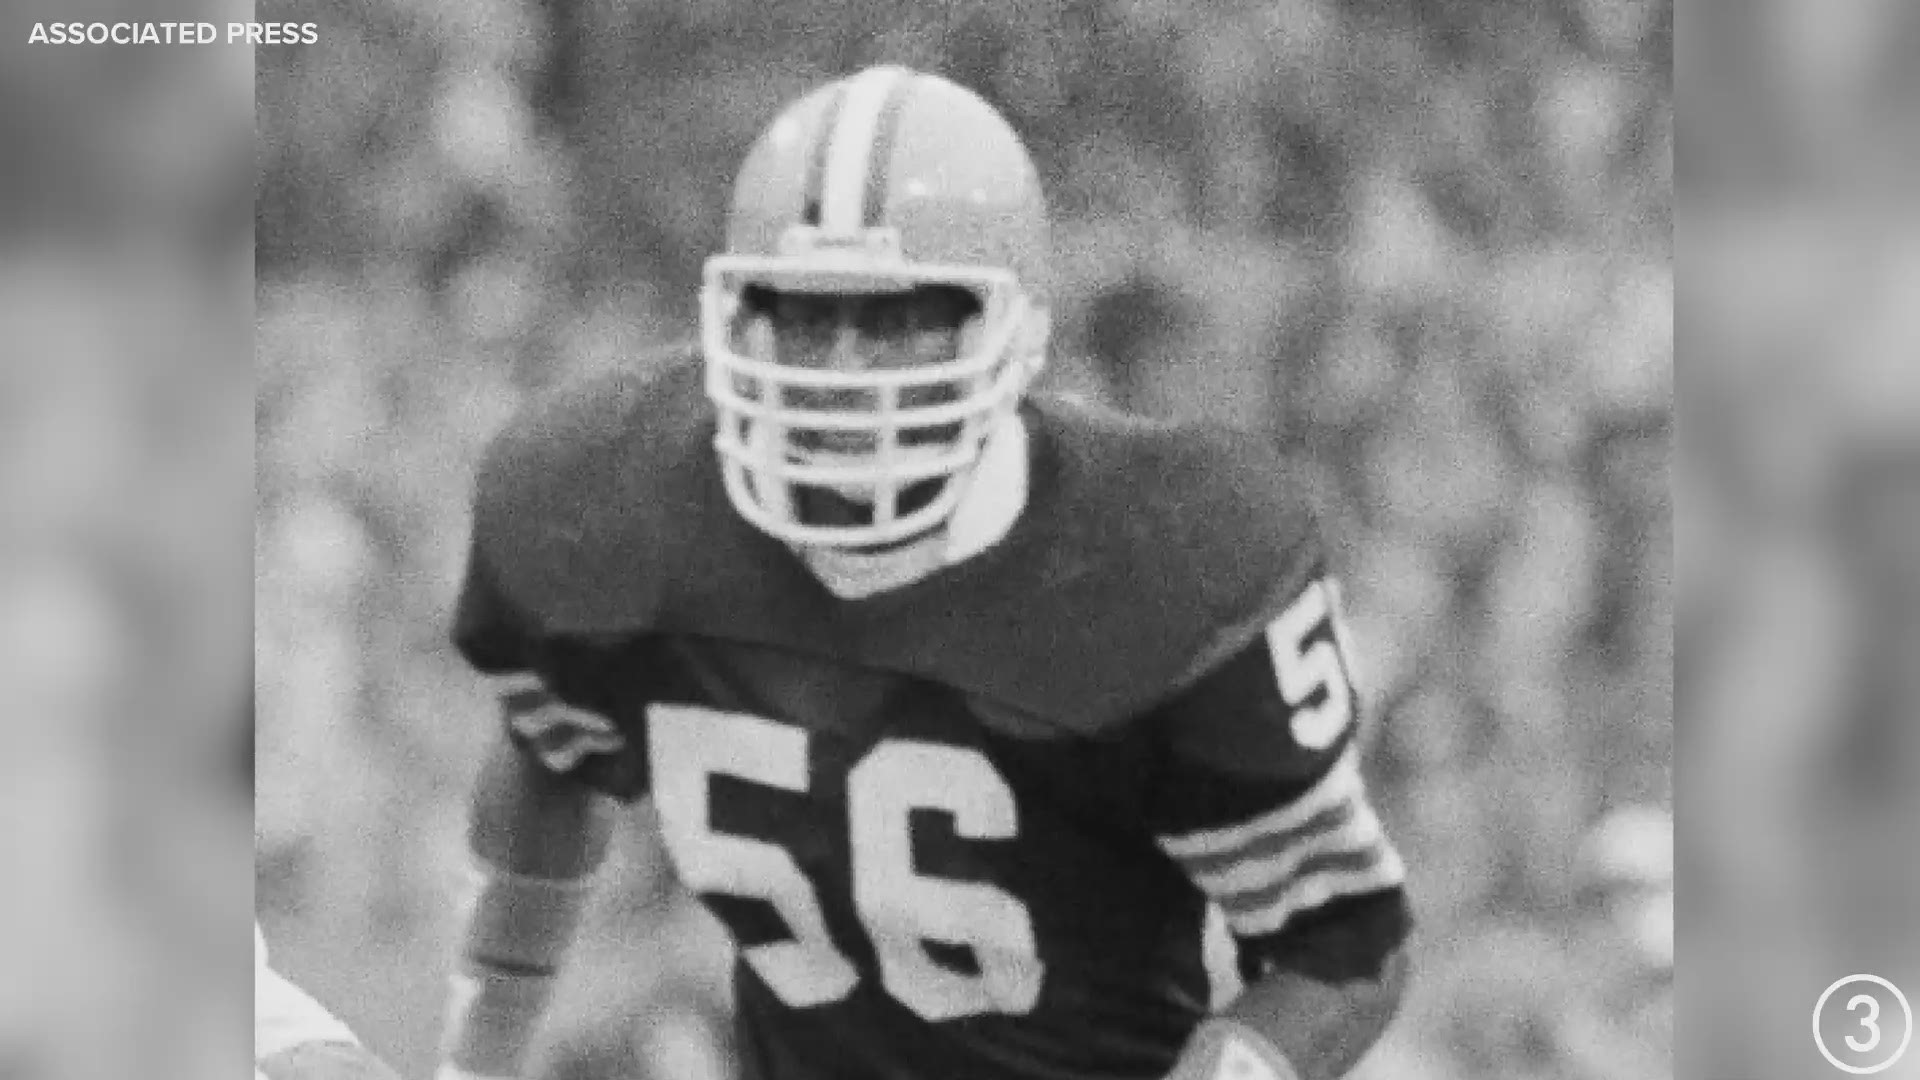 Chip Banks was drafted by the Cleveland Browns with the #3 overall pick in the 1982 NFL Draft. Banks played for the Browns from 1982-1986.